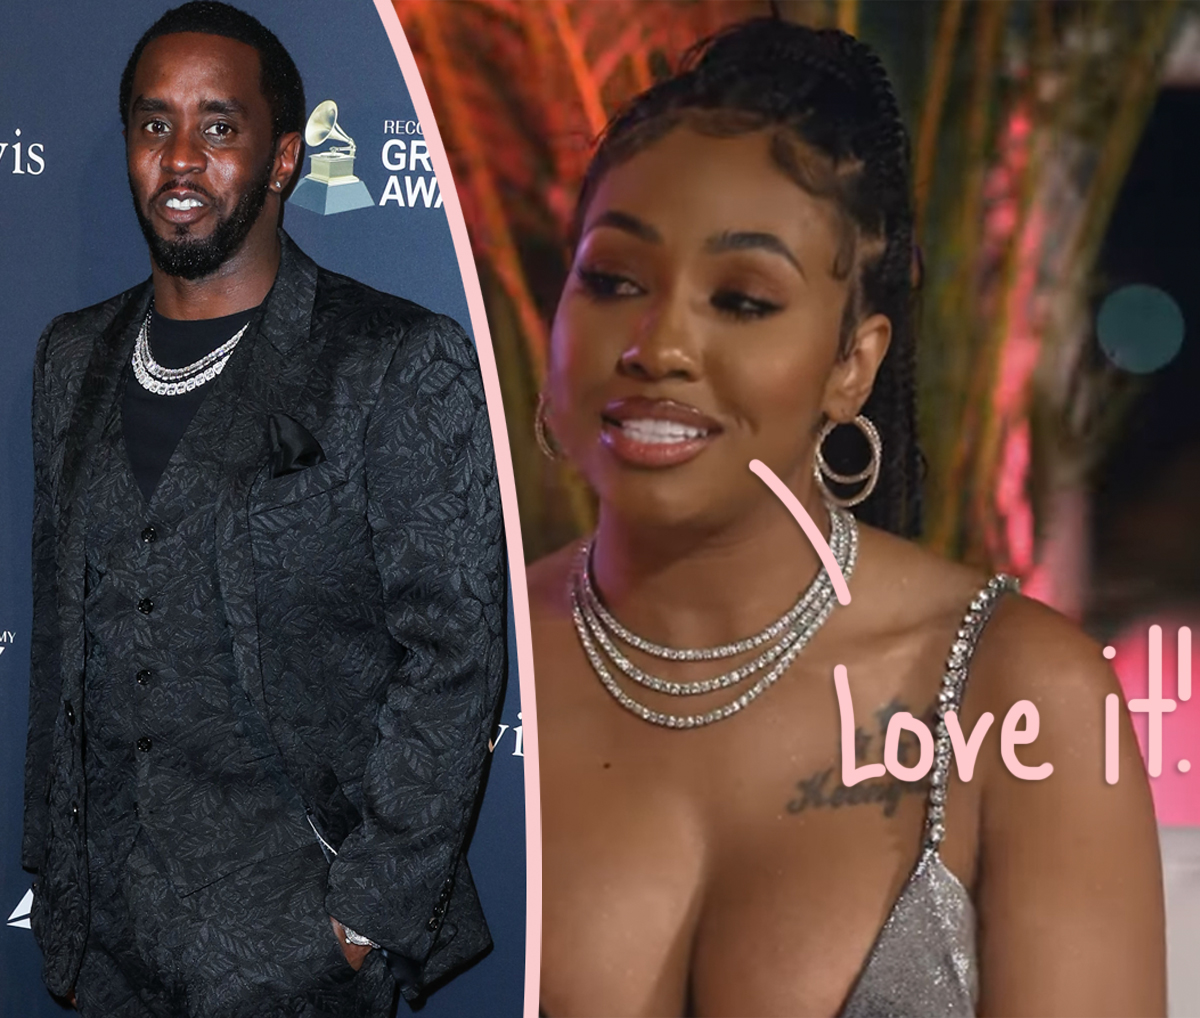 #Diddy’s GF Yung Miami Admits She Likes Golden Showers!